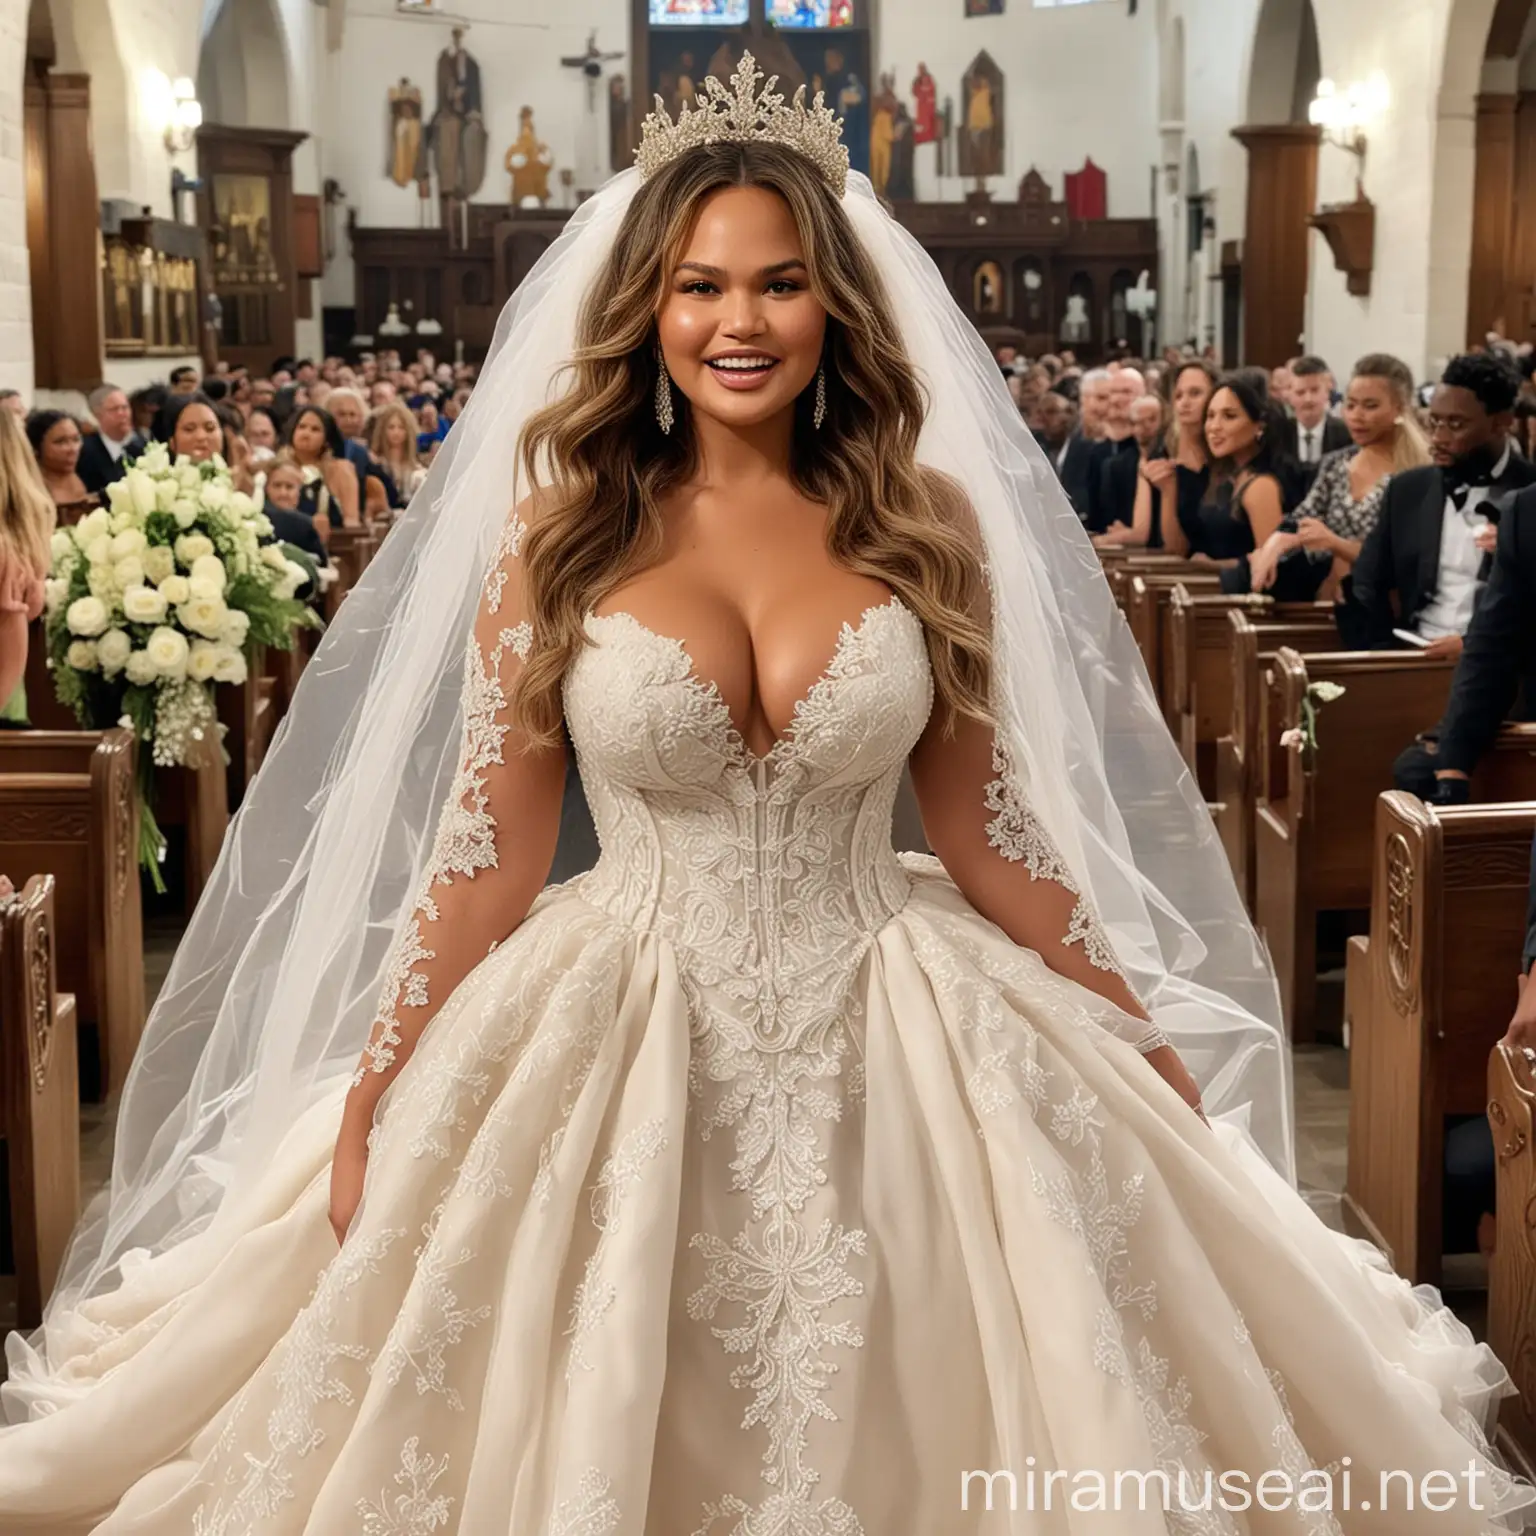 Chrissy Teigen in Wedding Dress Church Ceremony with Curly Hair and Stunning Cleavage